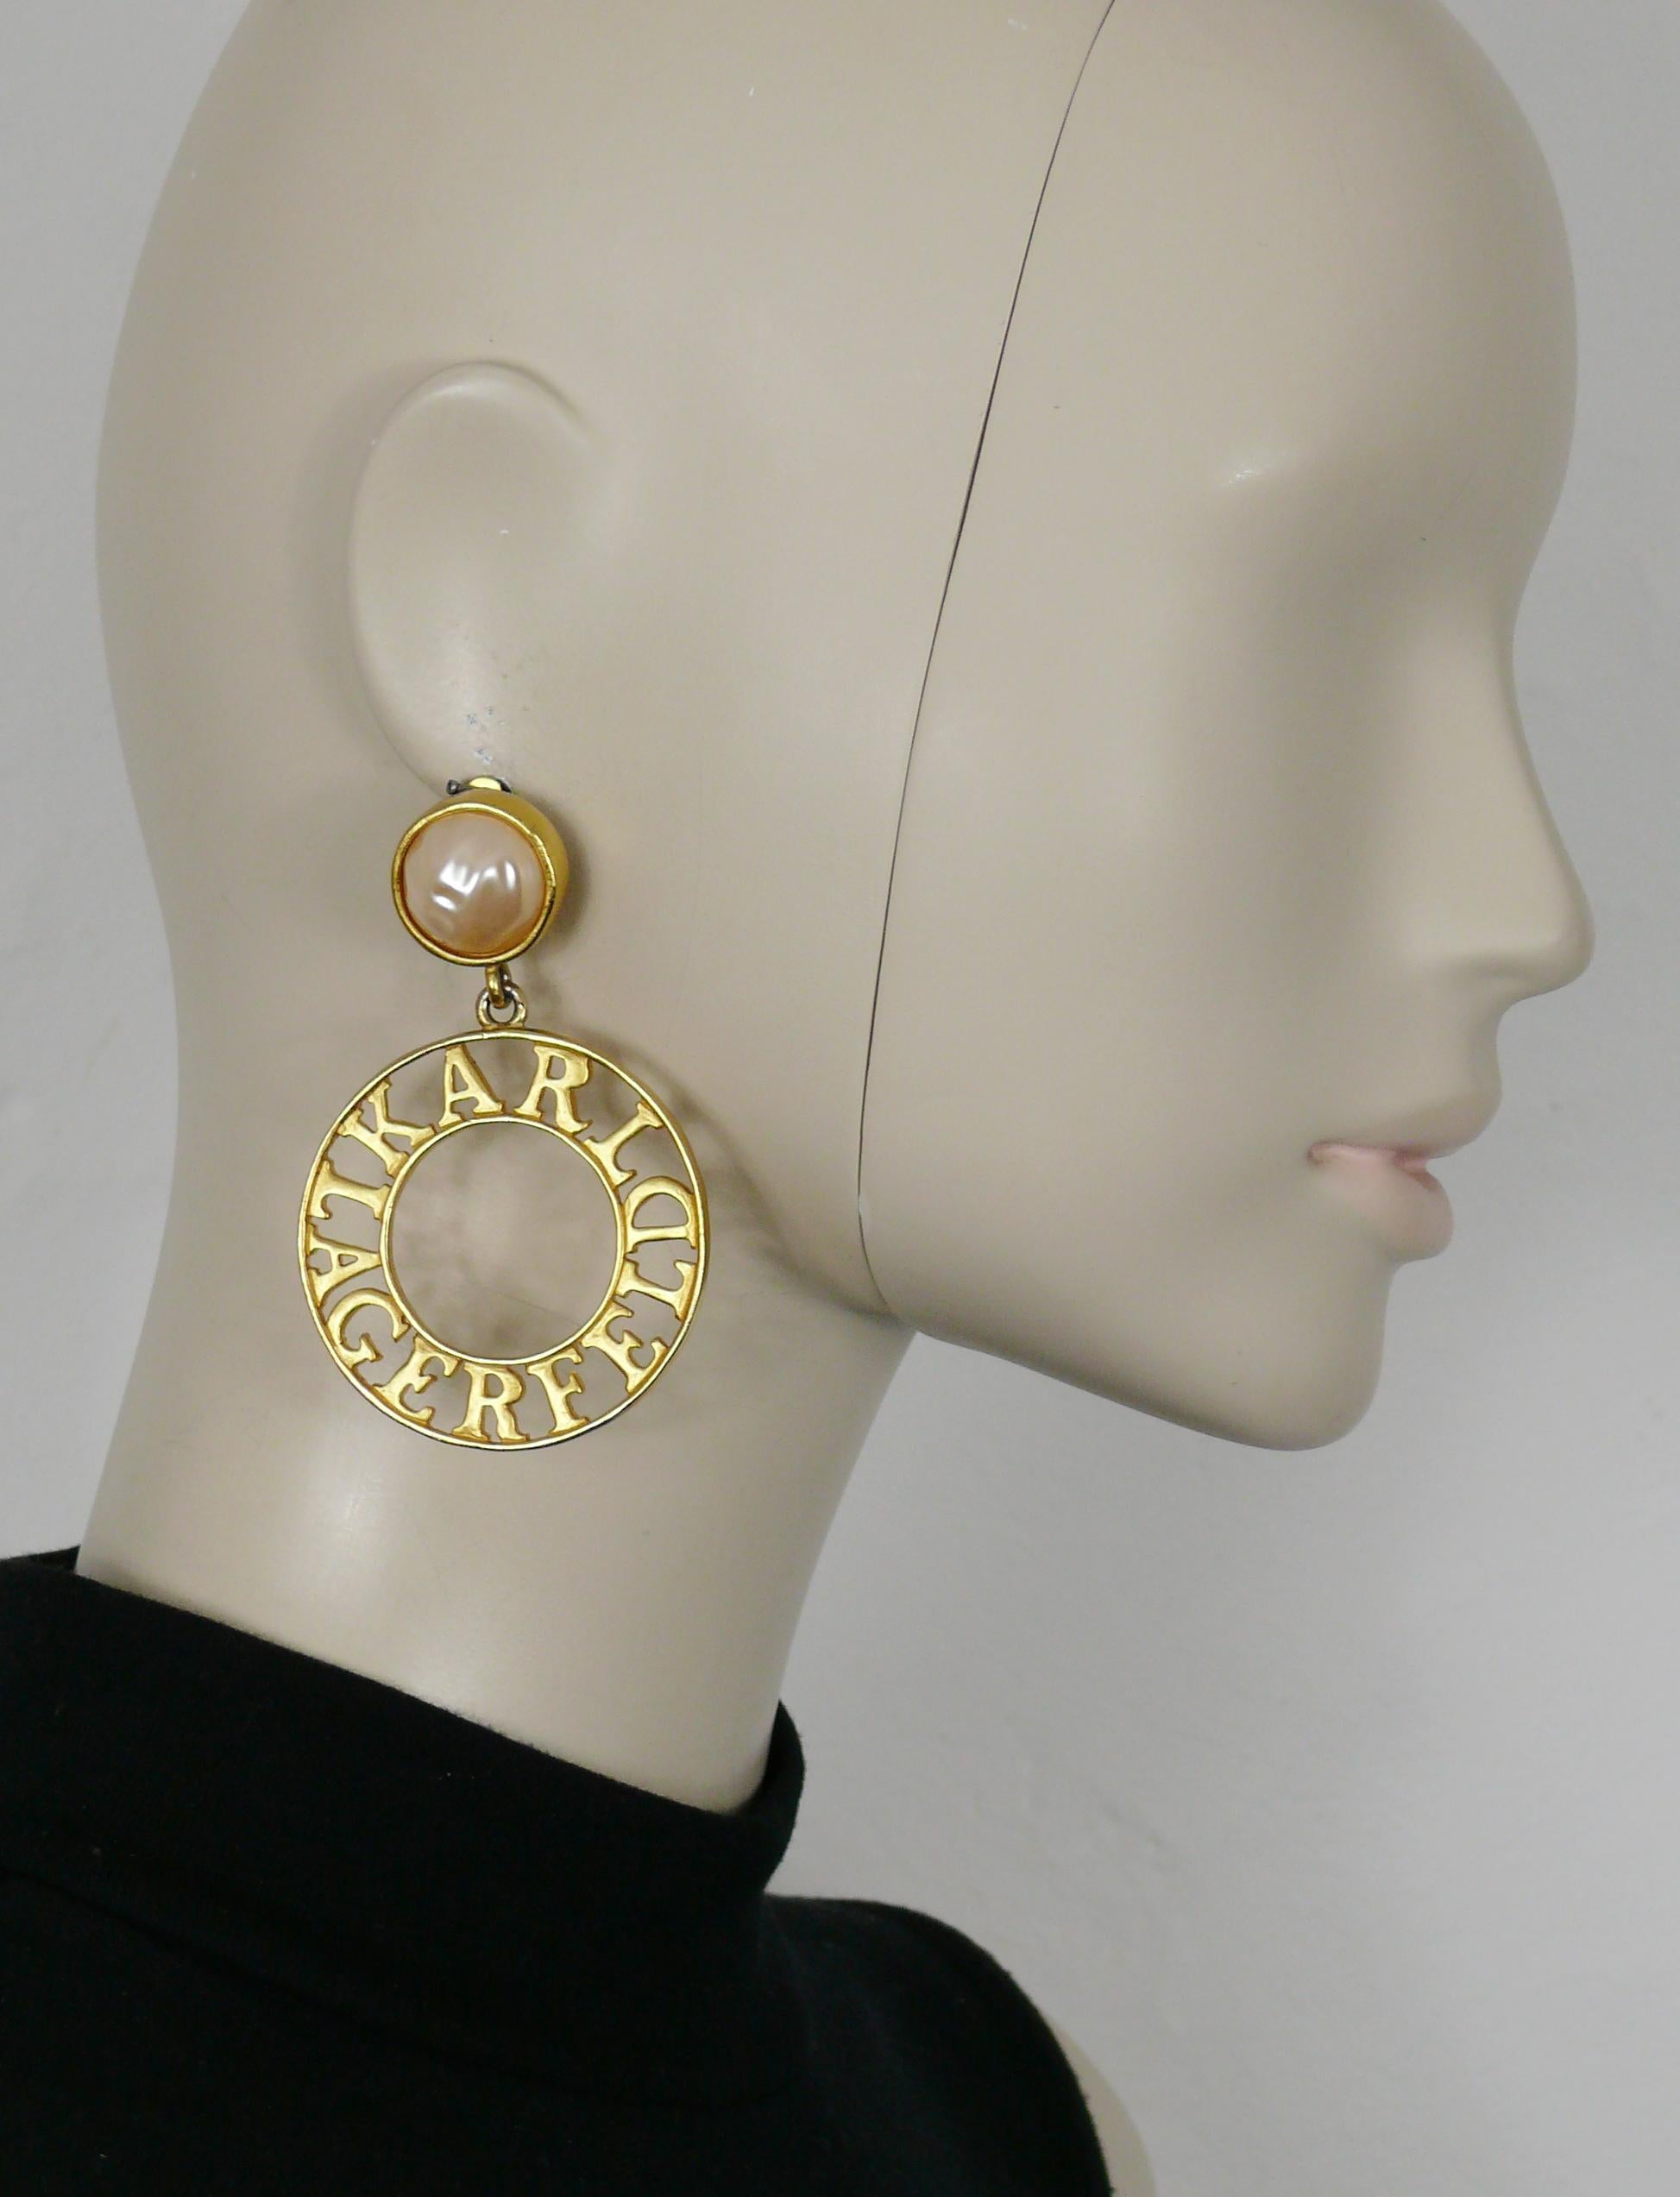 KARL LAGERFELD vintage gold tone hoop earrings (clip-on) featuring an irregular shape faux resin pearl top and a cut out KARL LAGERFELD spelling pendant.

Embossed KL.

Indicative measurements : max. height approx. 7.8 cm (3.07 inches) / max. width